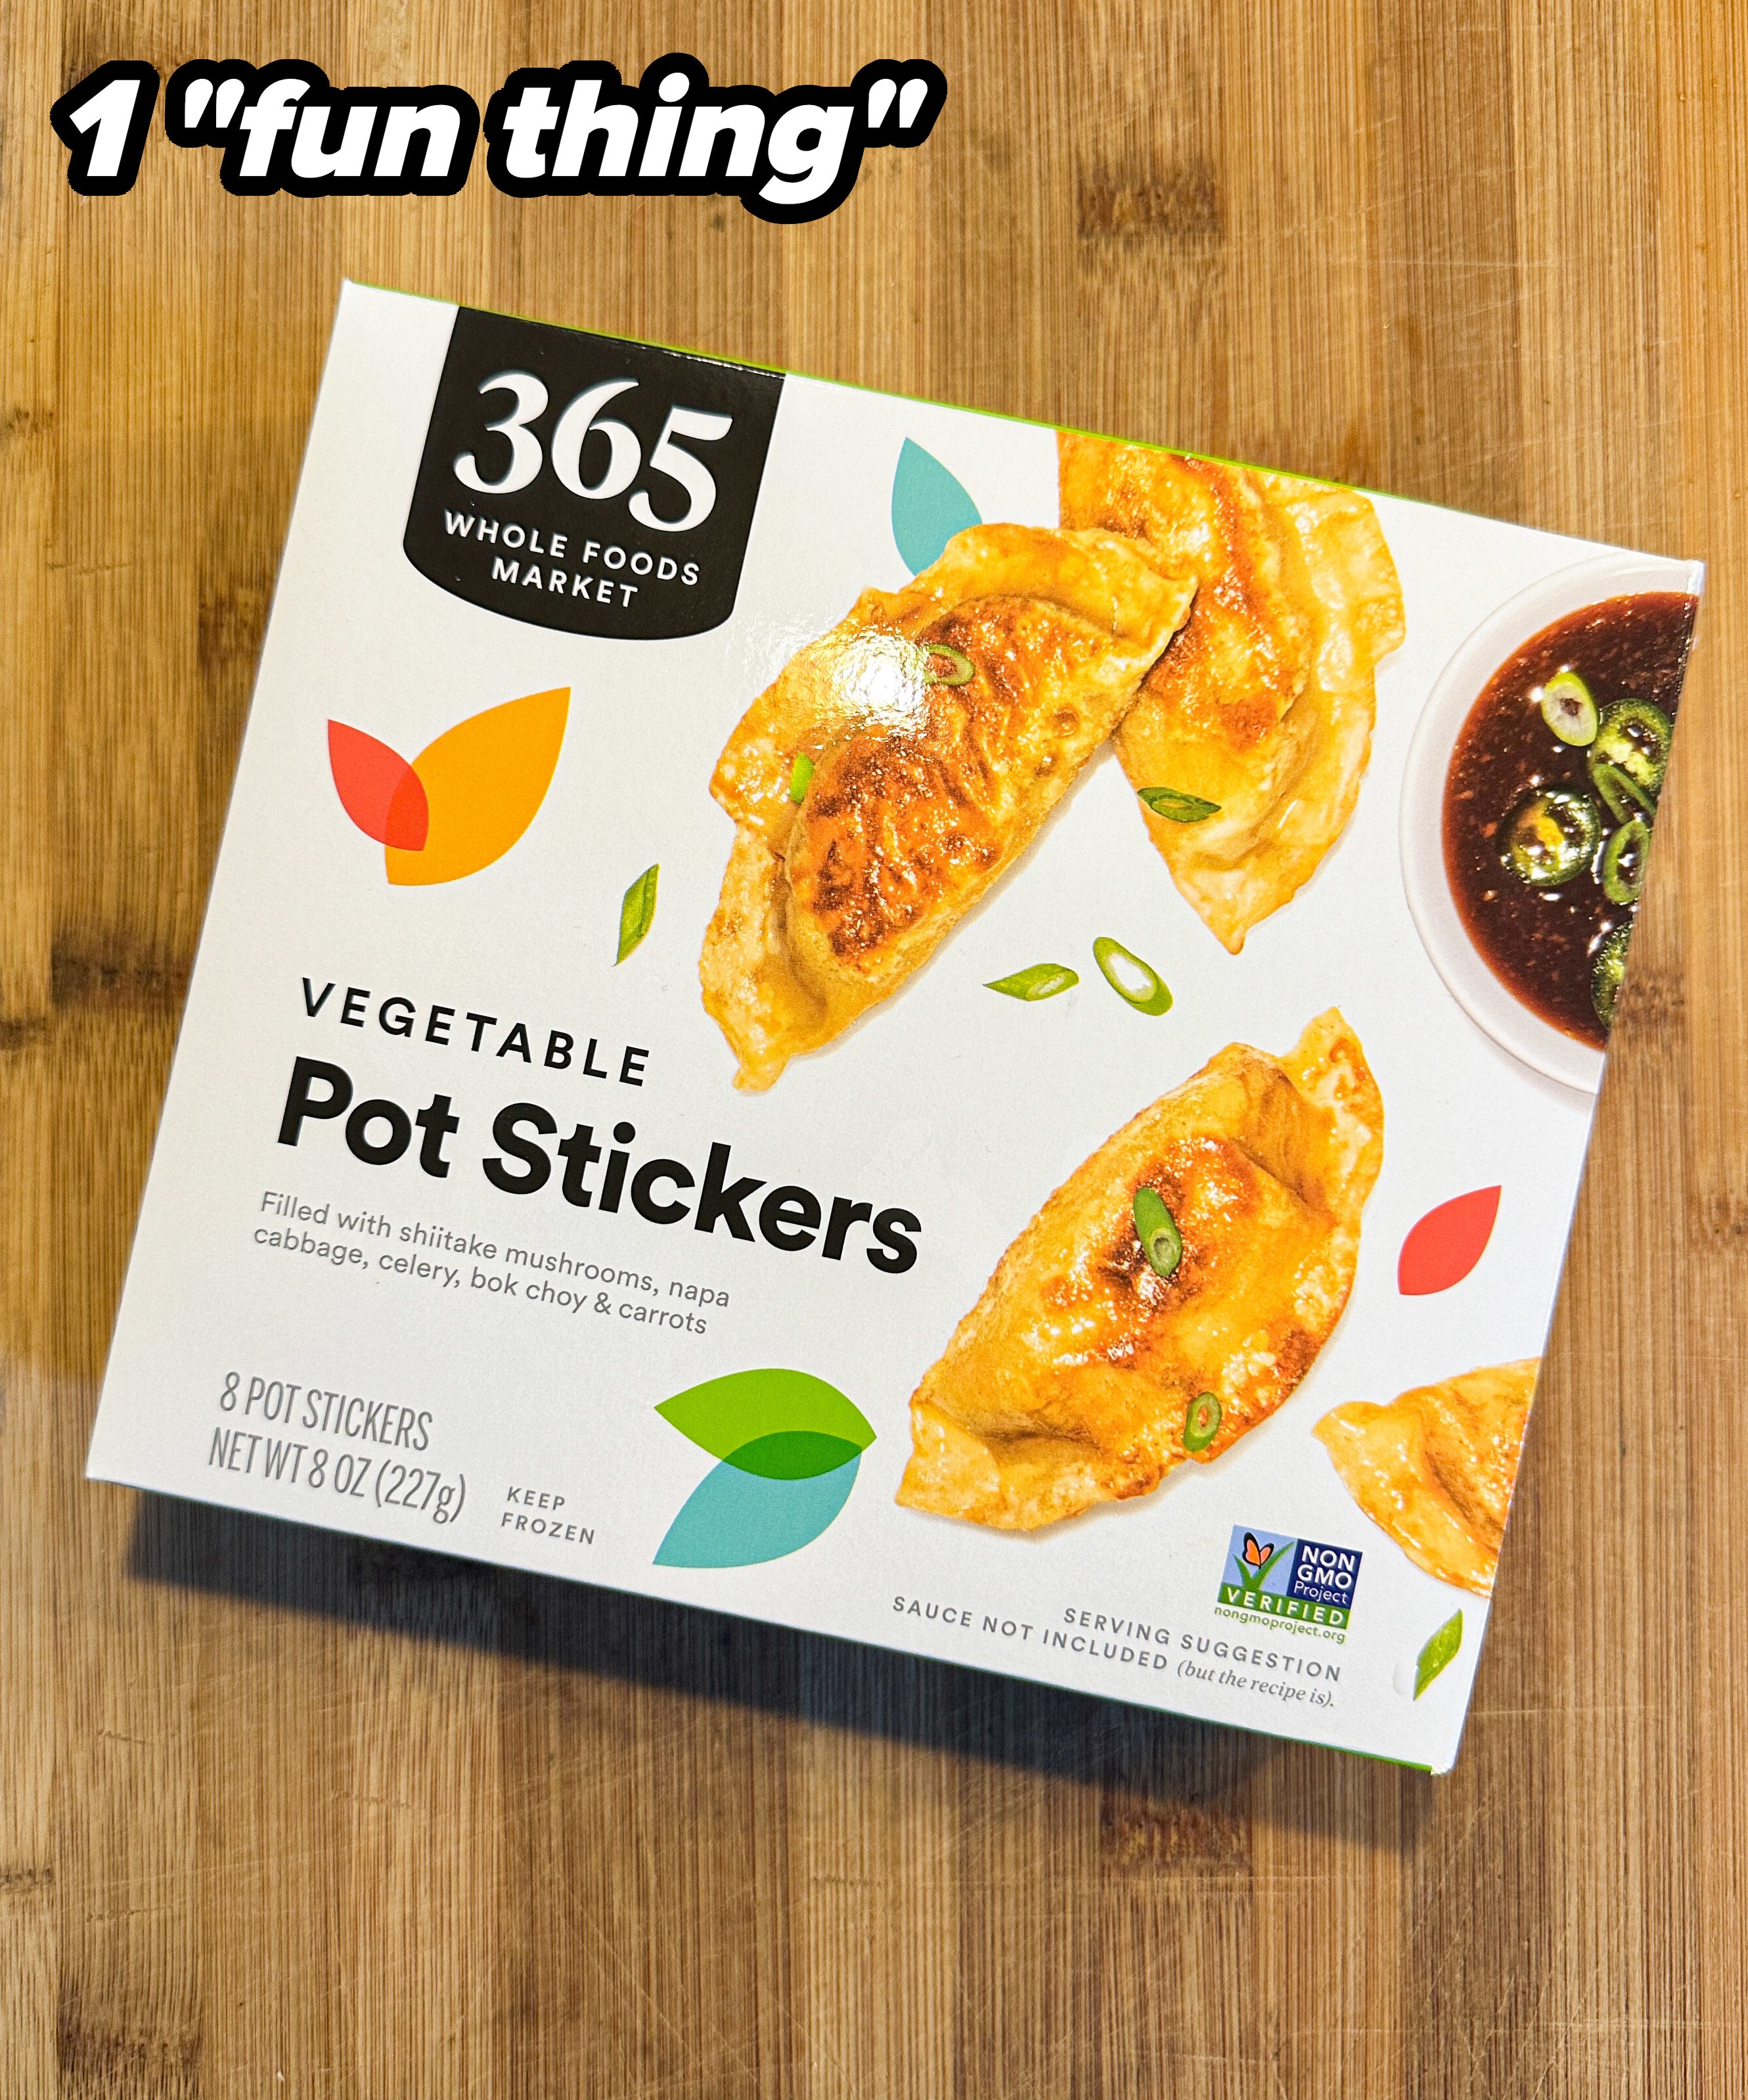 Package of 365 Whole Foods Market Vegetable Pot Stickers on a wooden surface